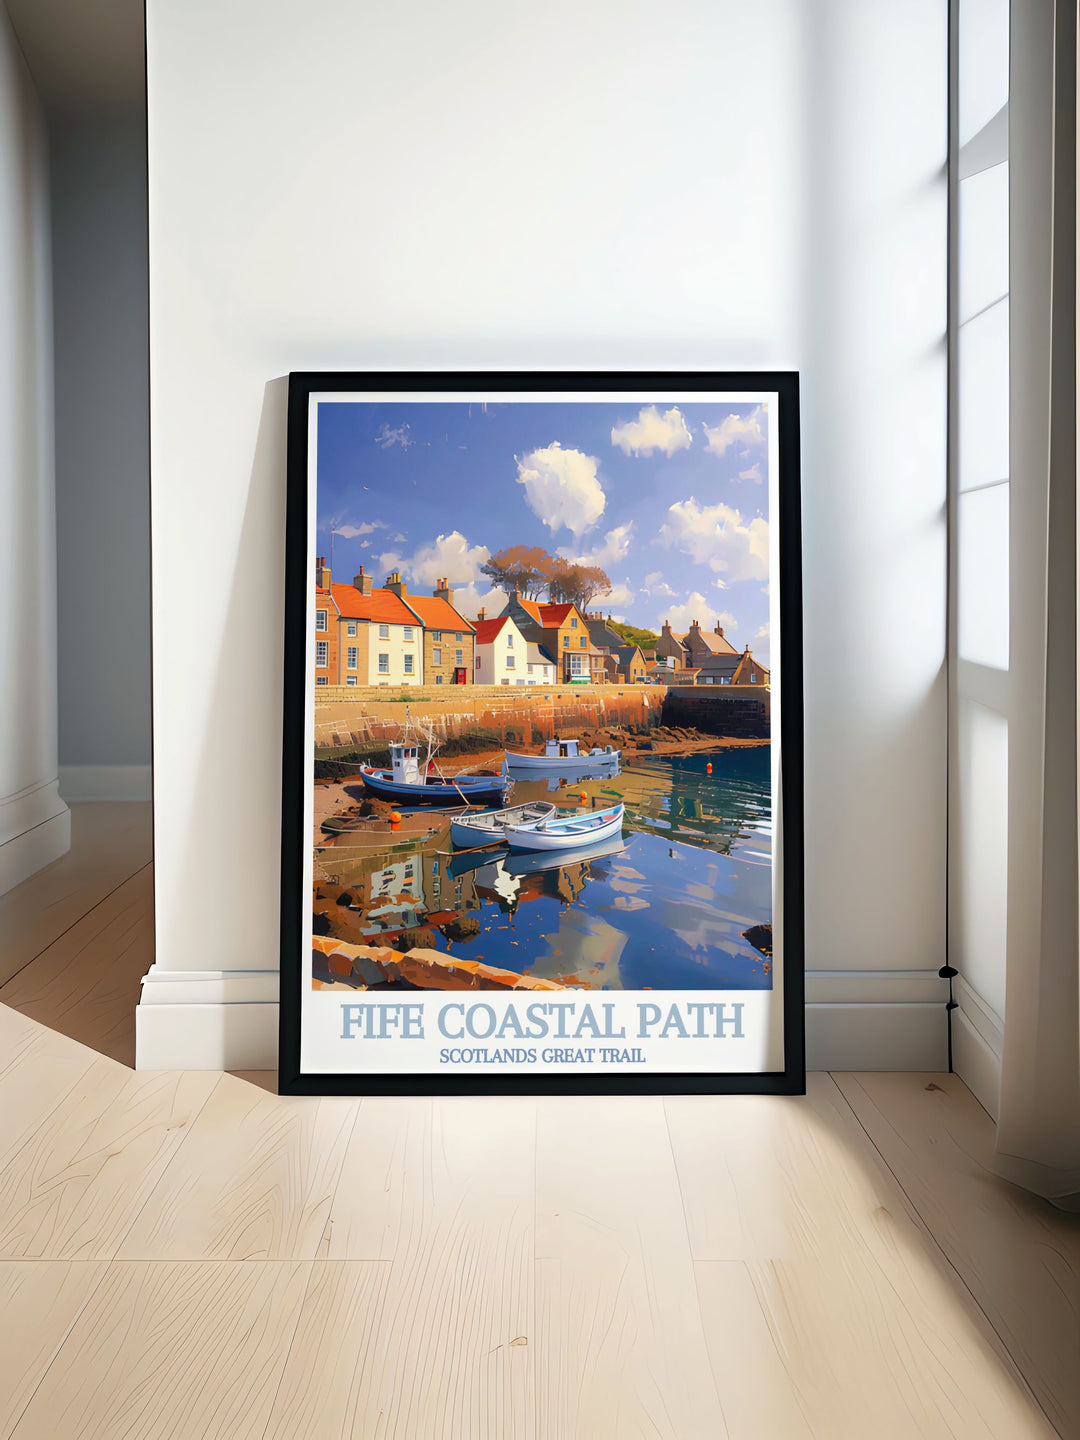 This Scotland travel poster features the stunning Fife Coastal Path and its picturesque surroundings, making it an ideal piece for those who love exploring Scotlands natural landscapes.